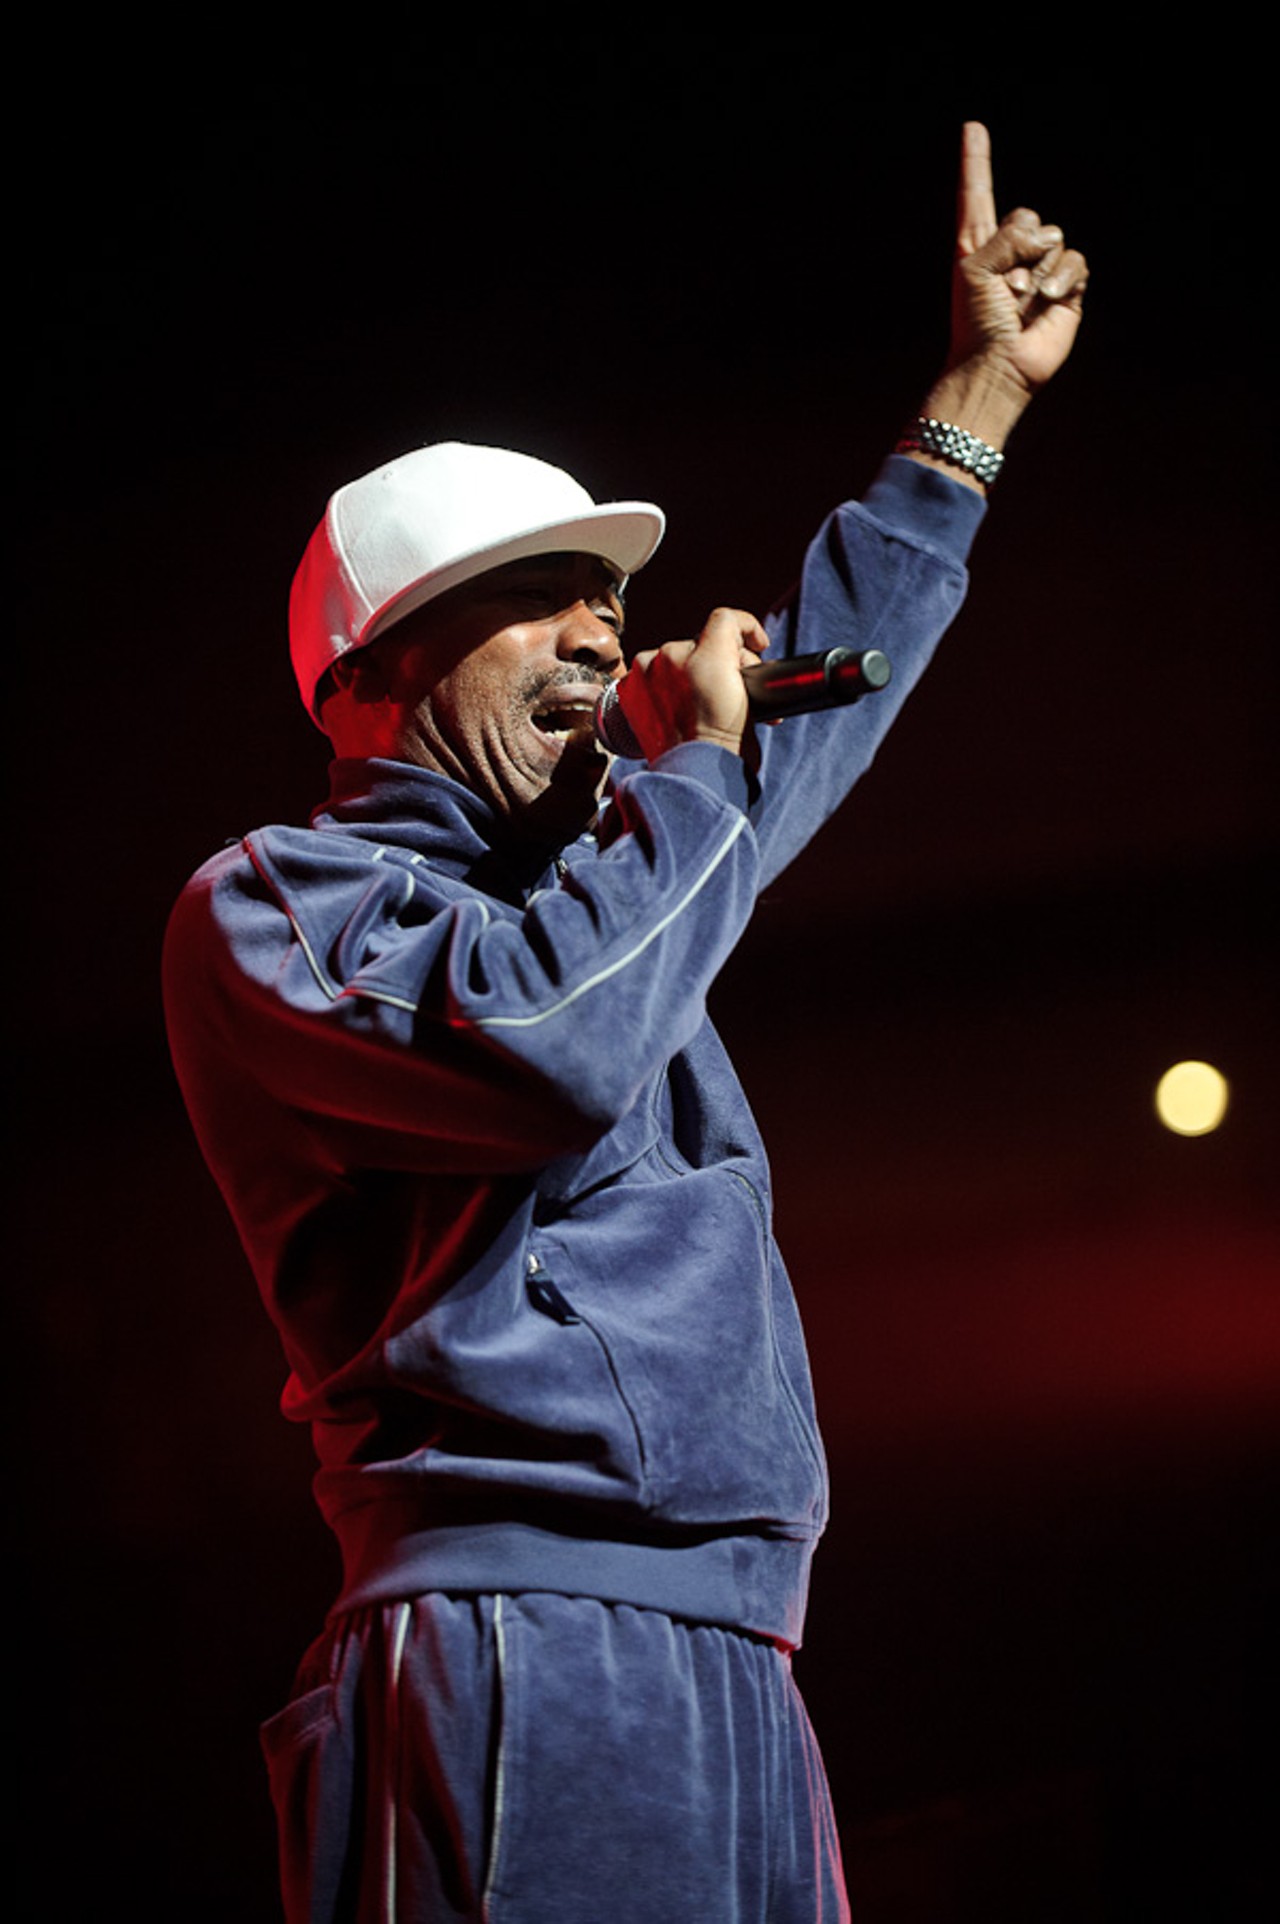 Kurtis Blow performing at the Chaifetz Arena.